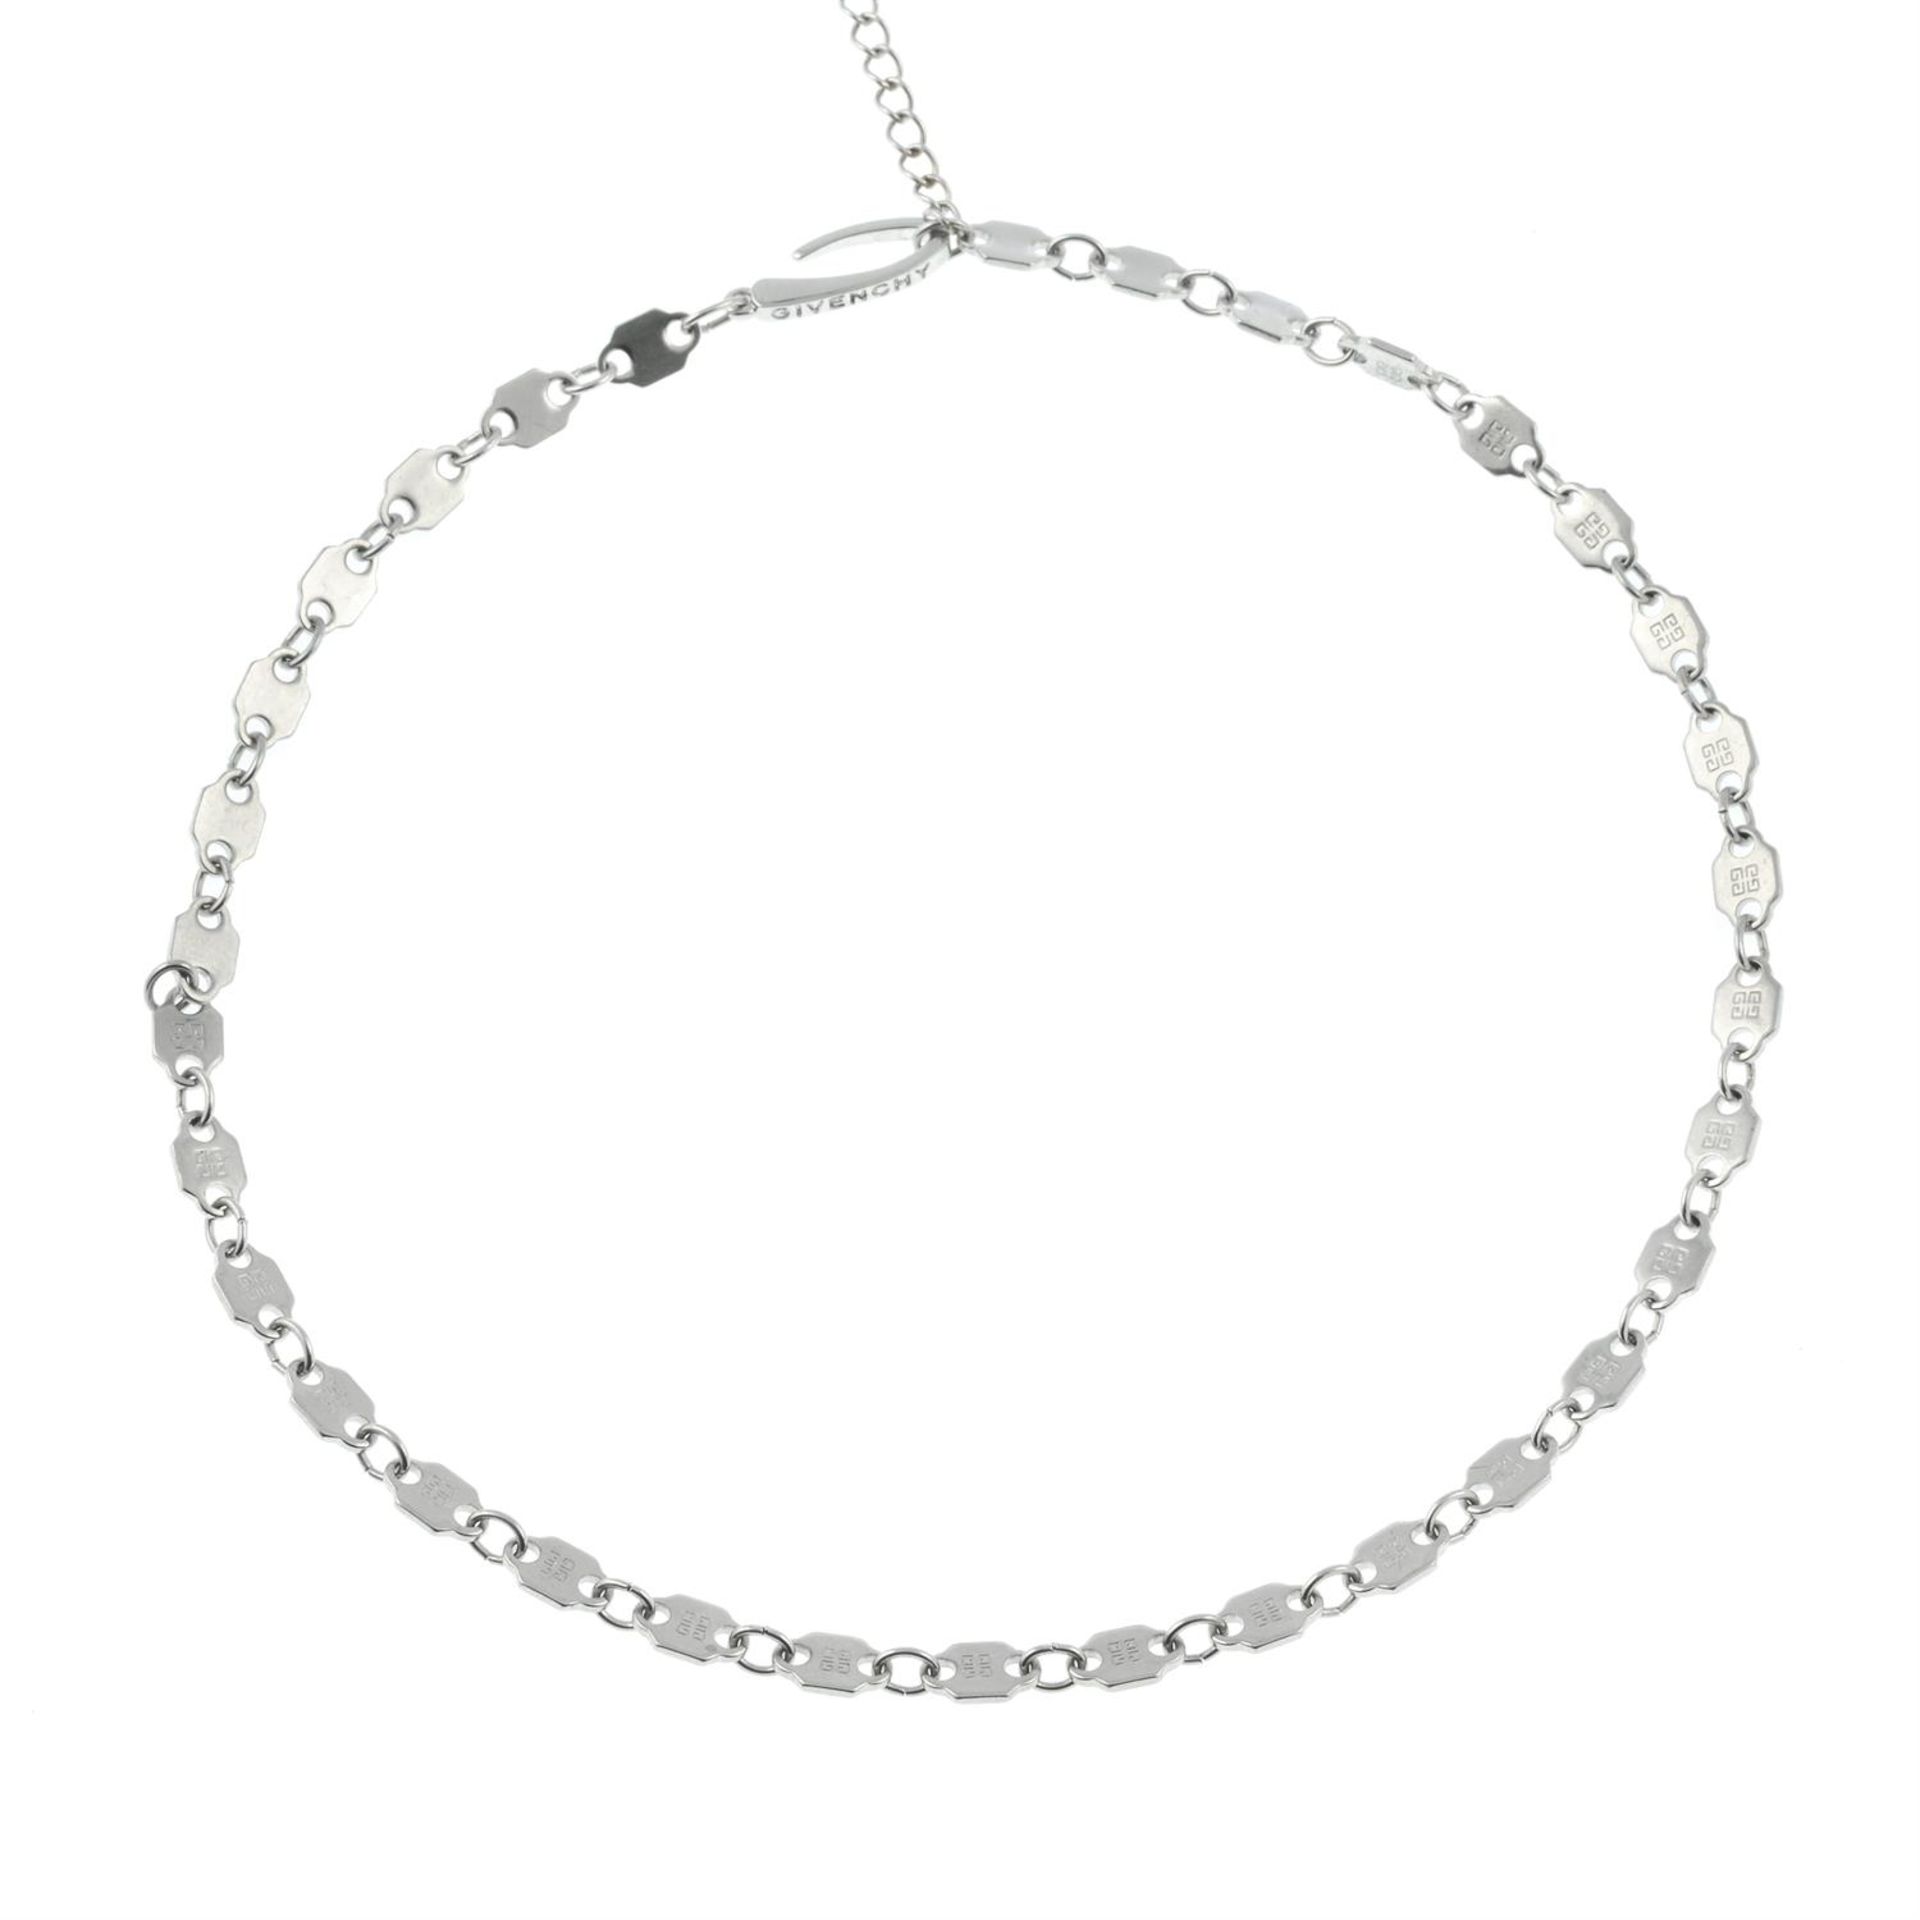 GIVENCHY - a silver-tone chain.